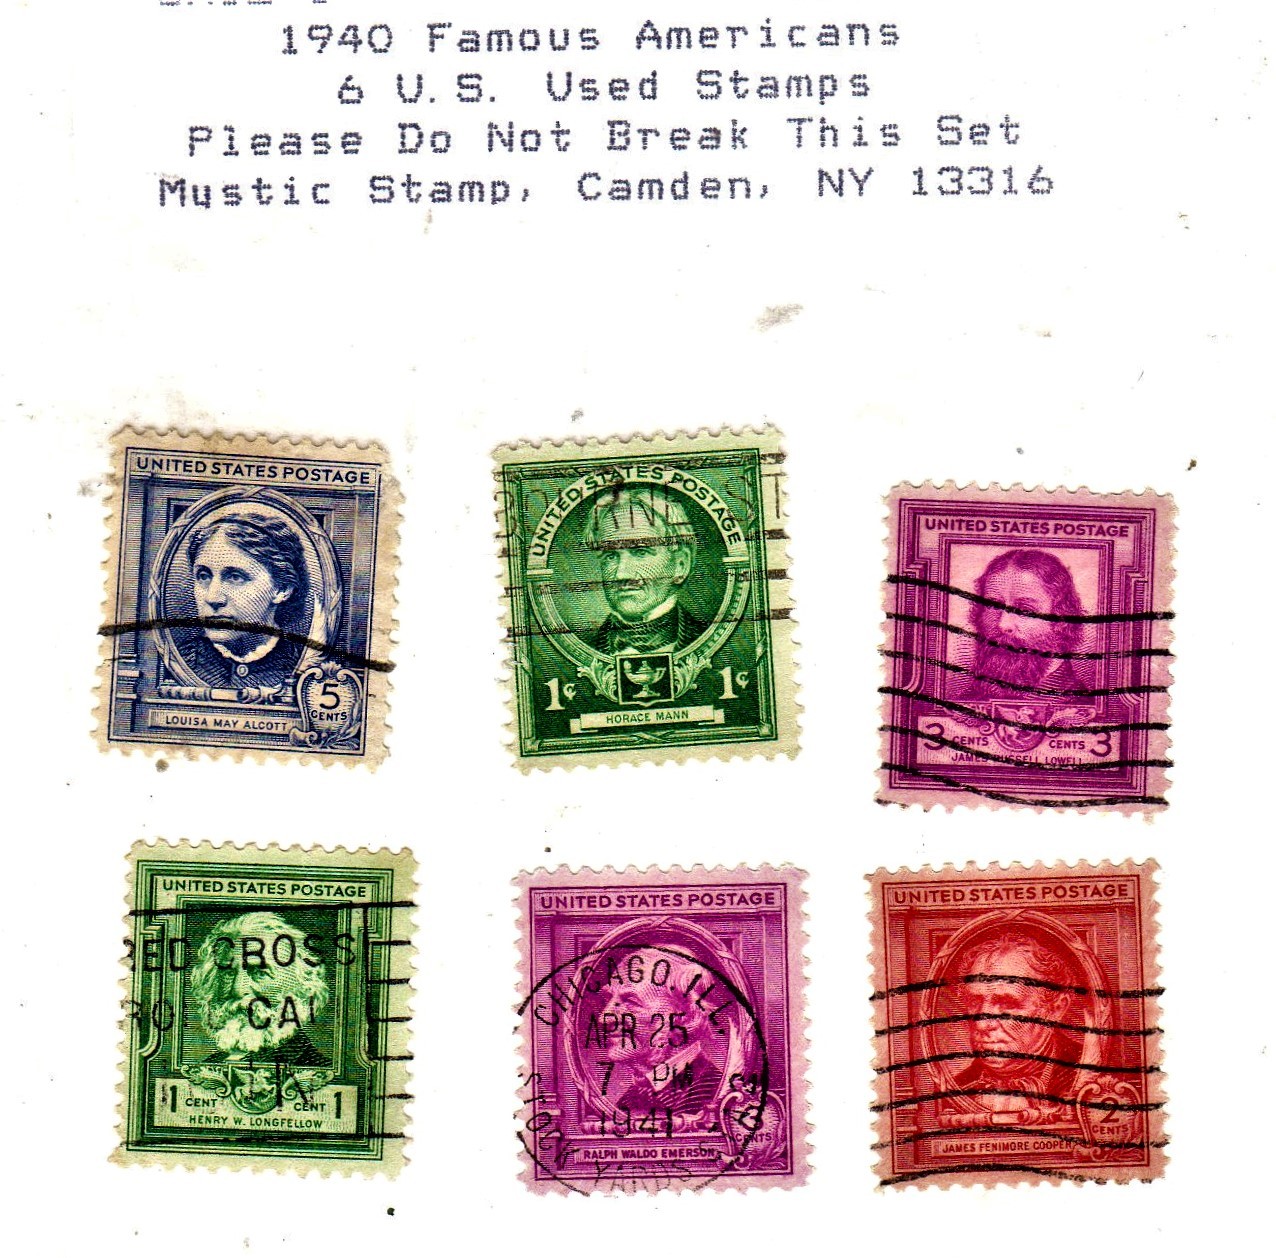 U S Stamps  - Lot of 6 1940 Famous Americans  - $2.20